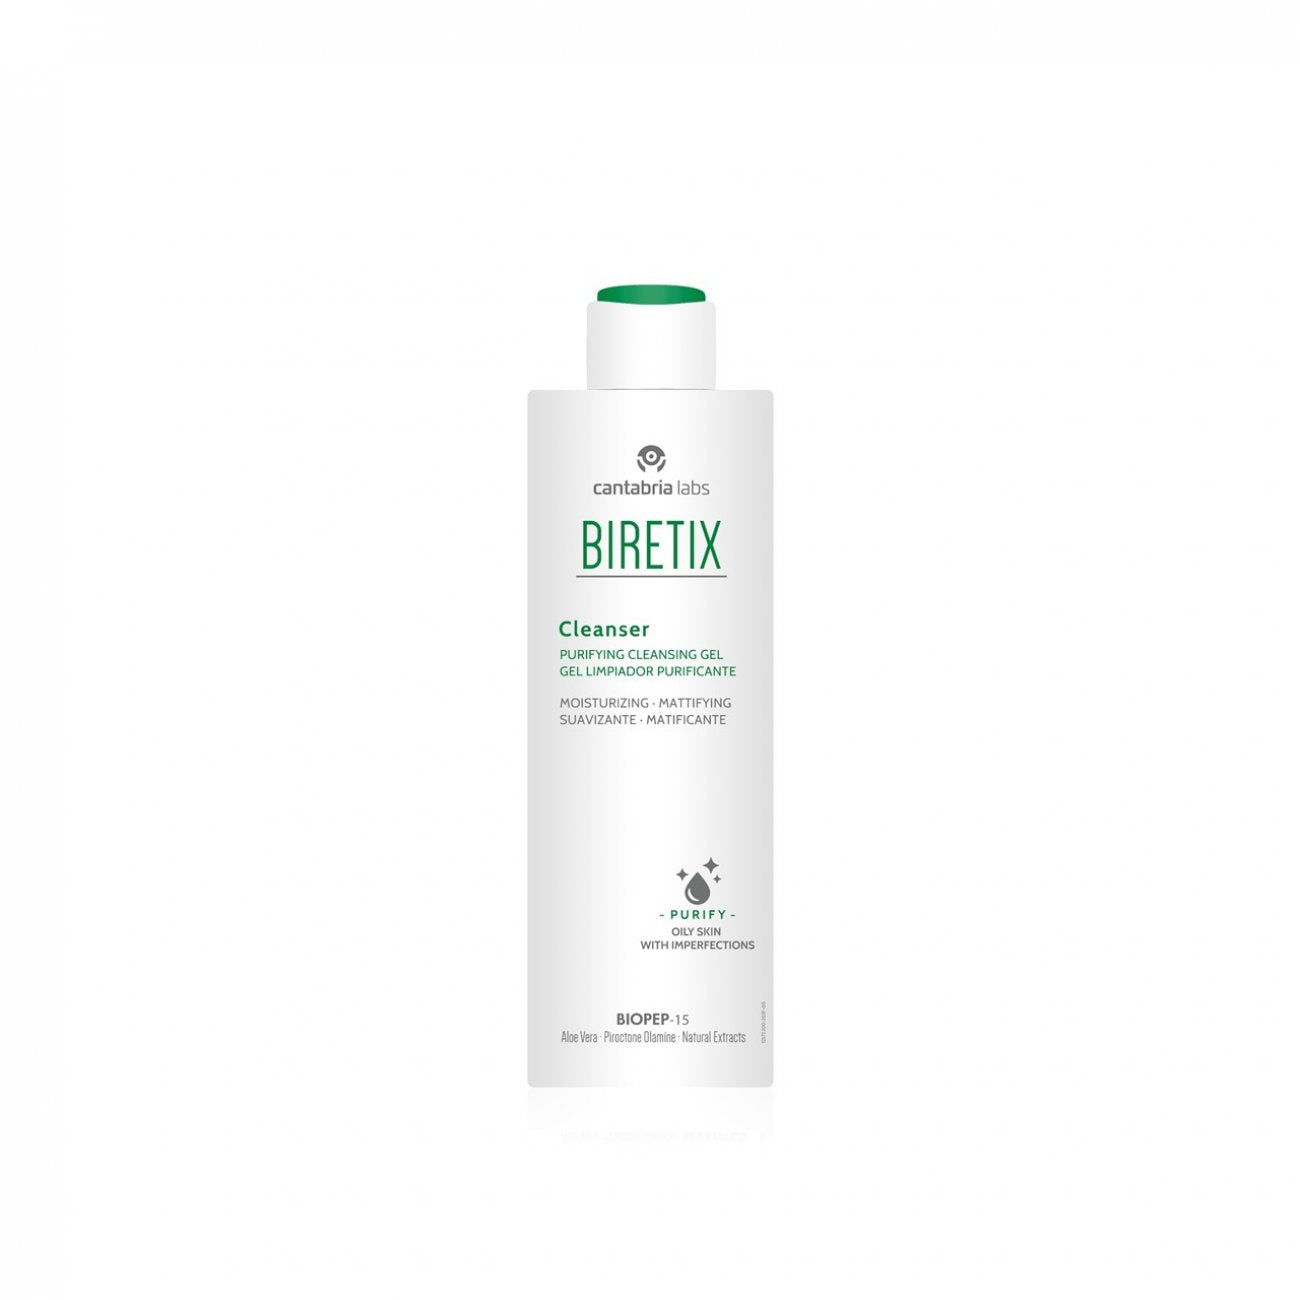 Cleanser Purifying Cleansing Gel 200ml